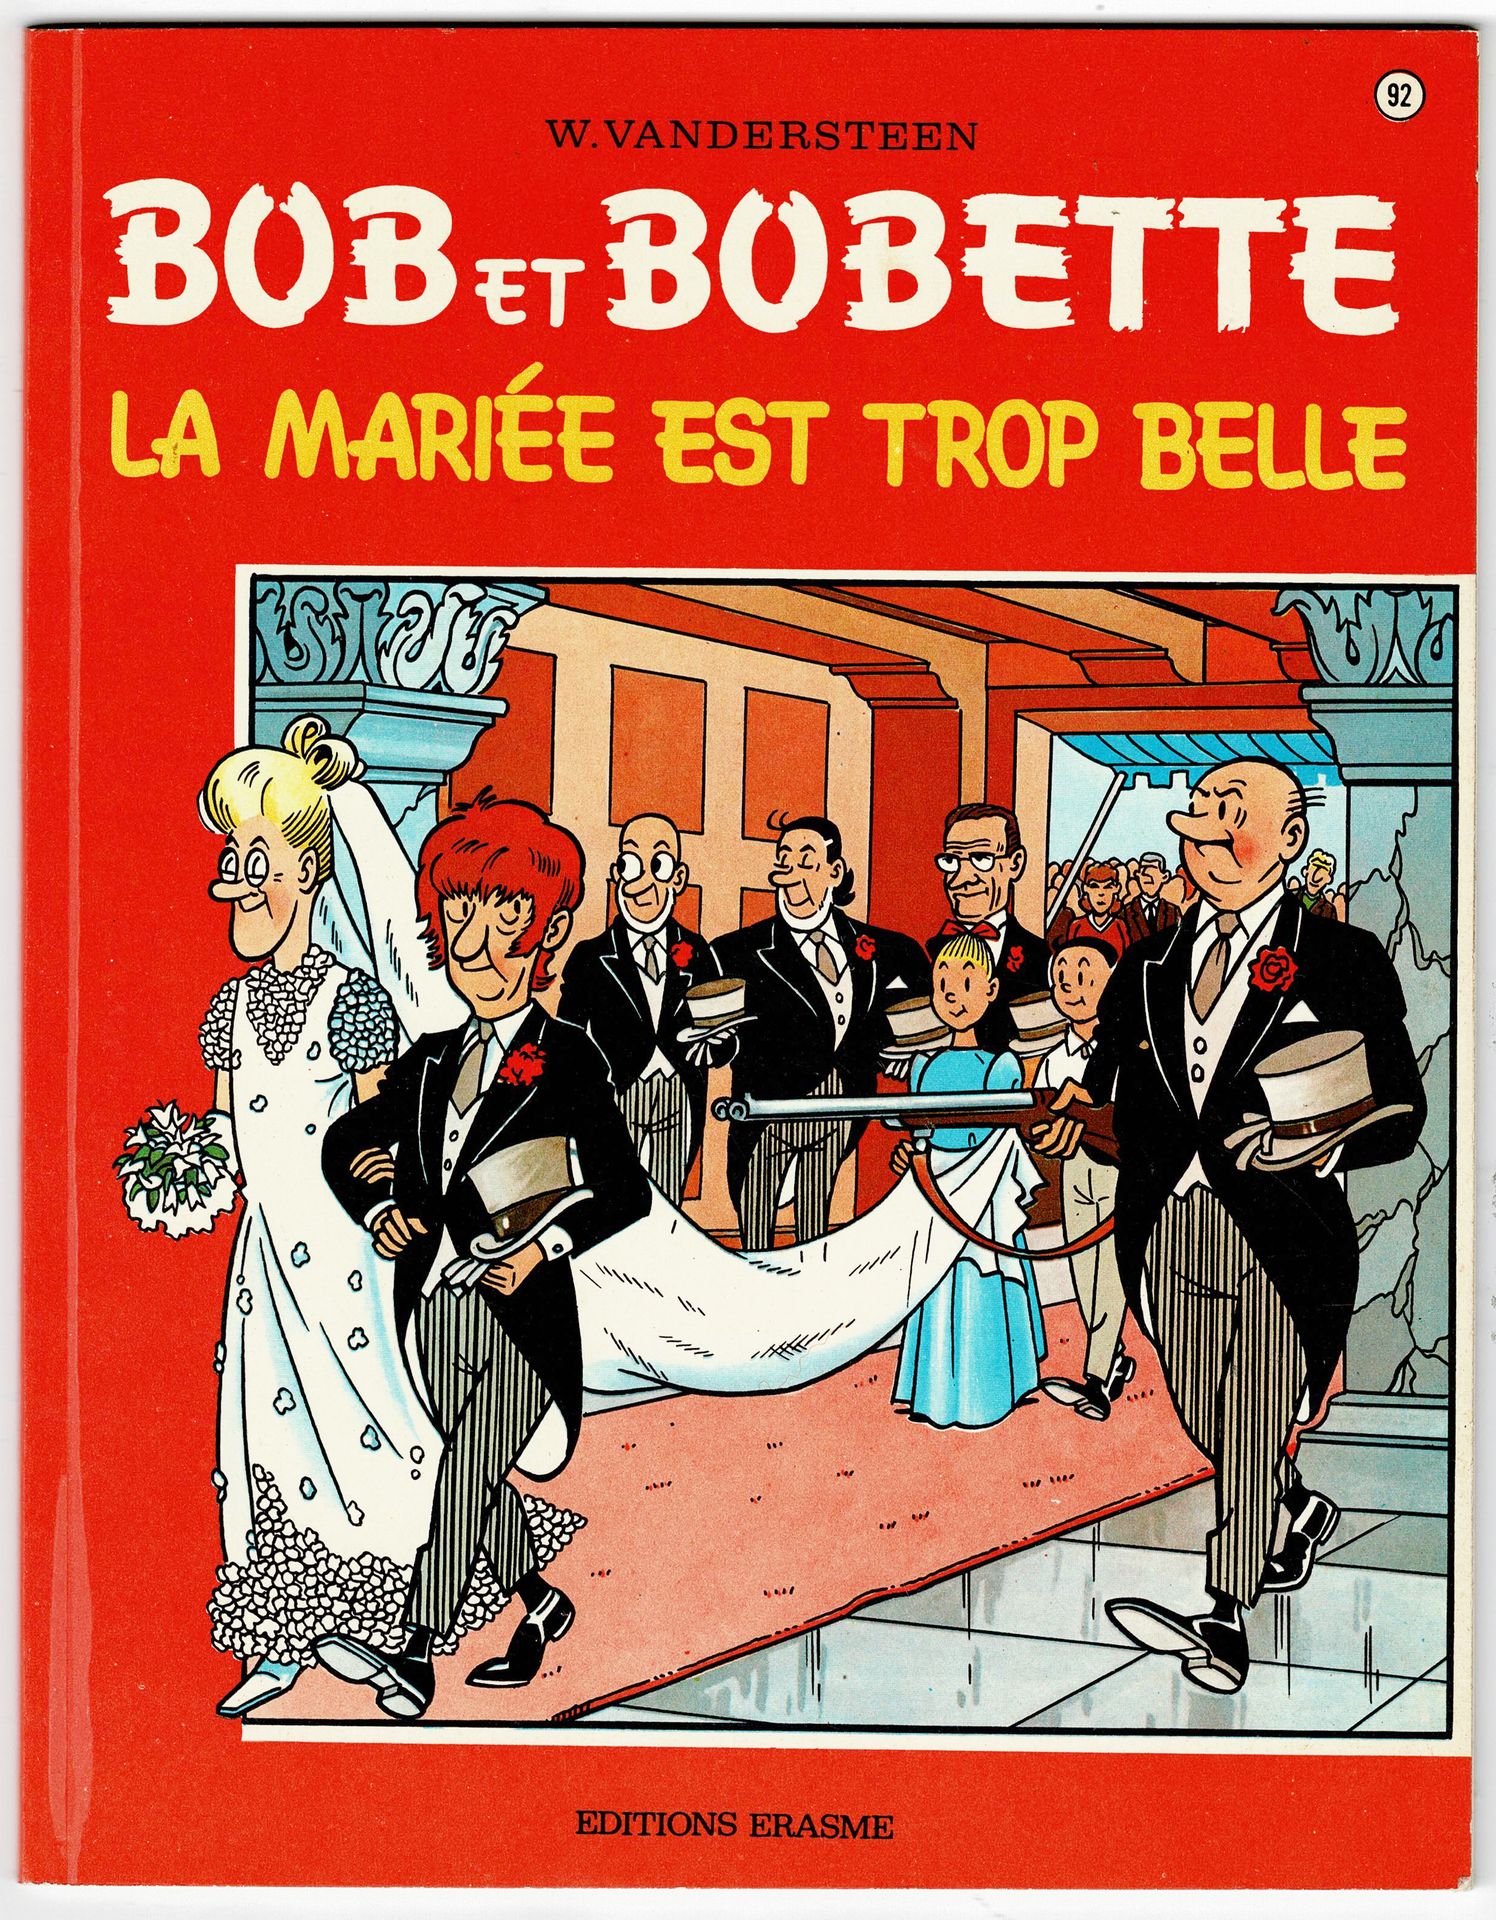 Bob et Bobette 
Volumes 92 and 97. Set of 2 albums in first edition and in new c&hellip;